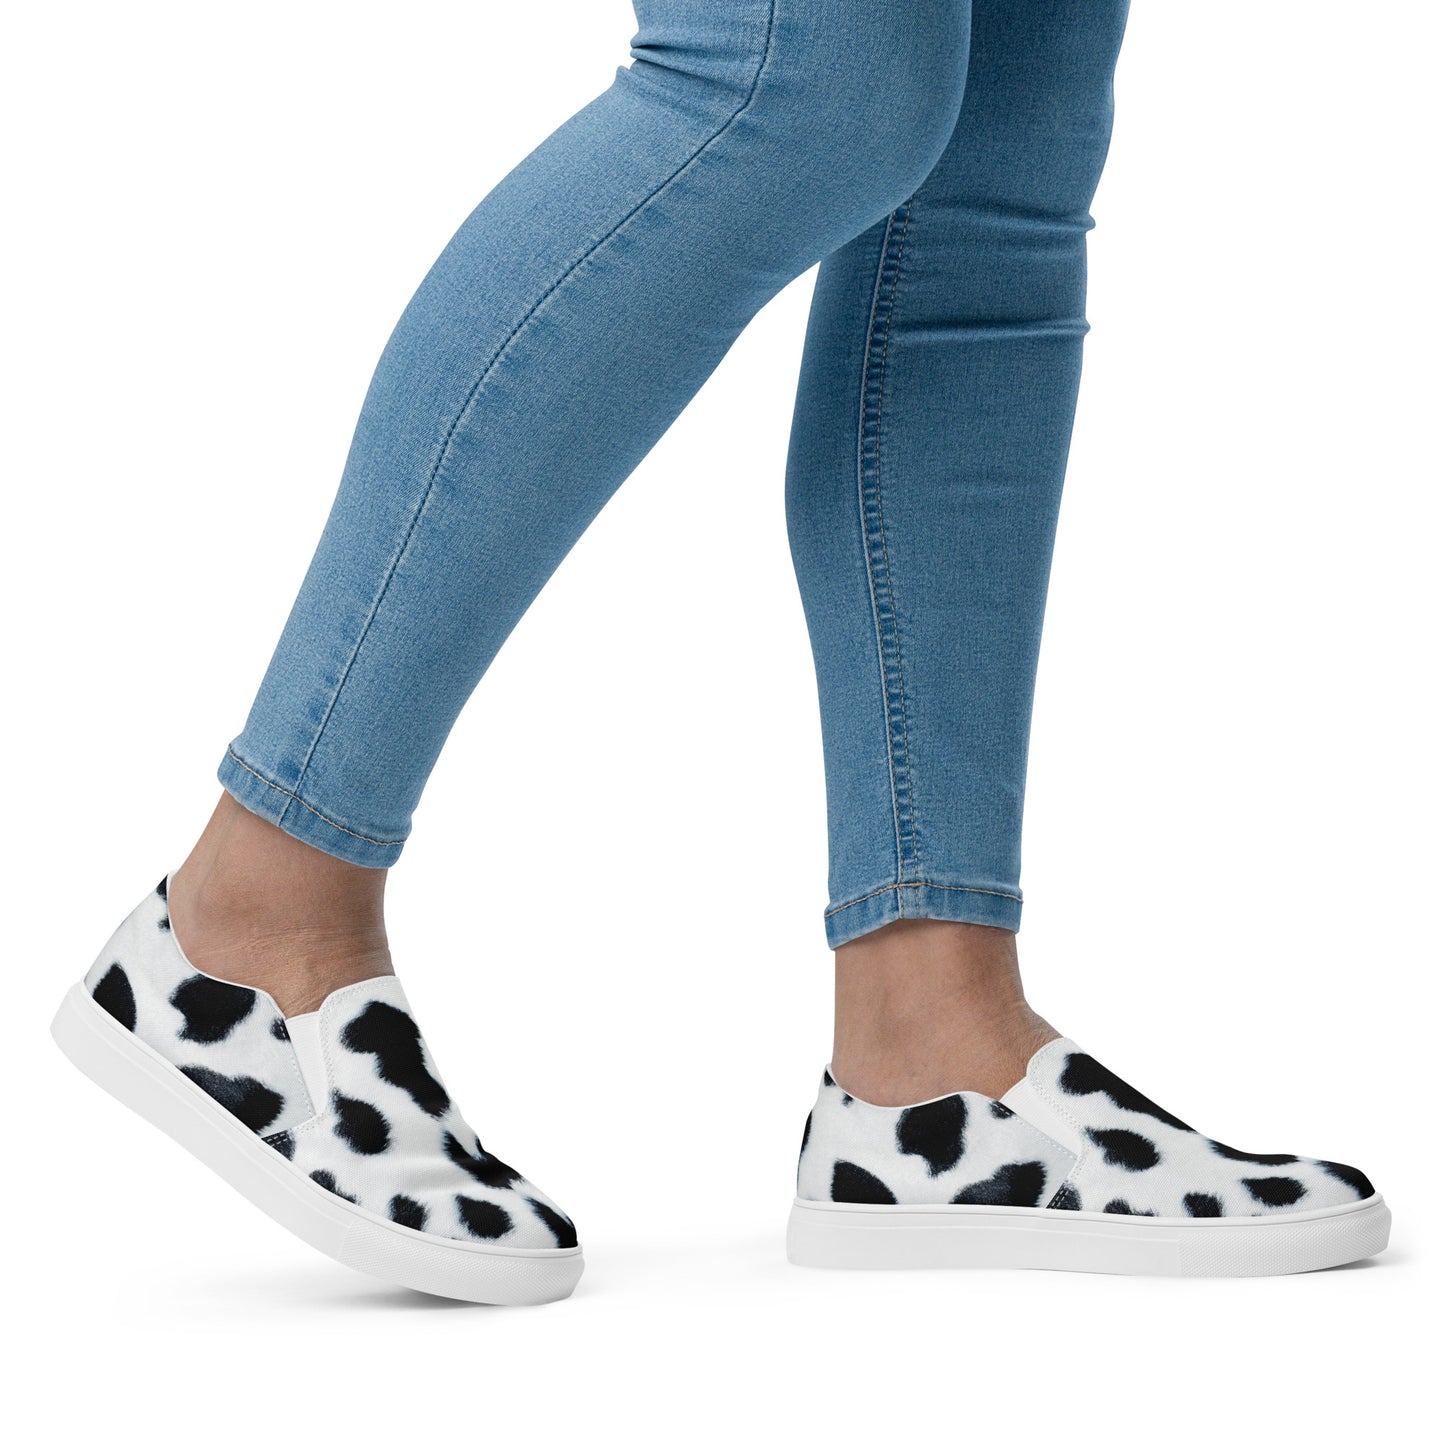 Cow Print Western Style Women’s slip-on canvas shoes